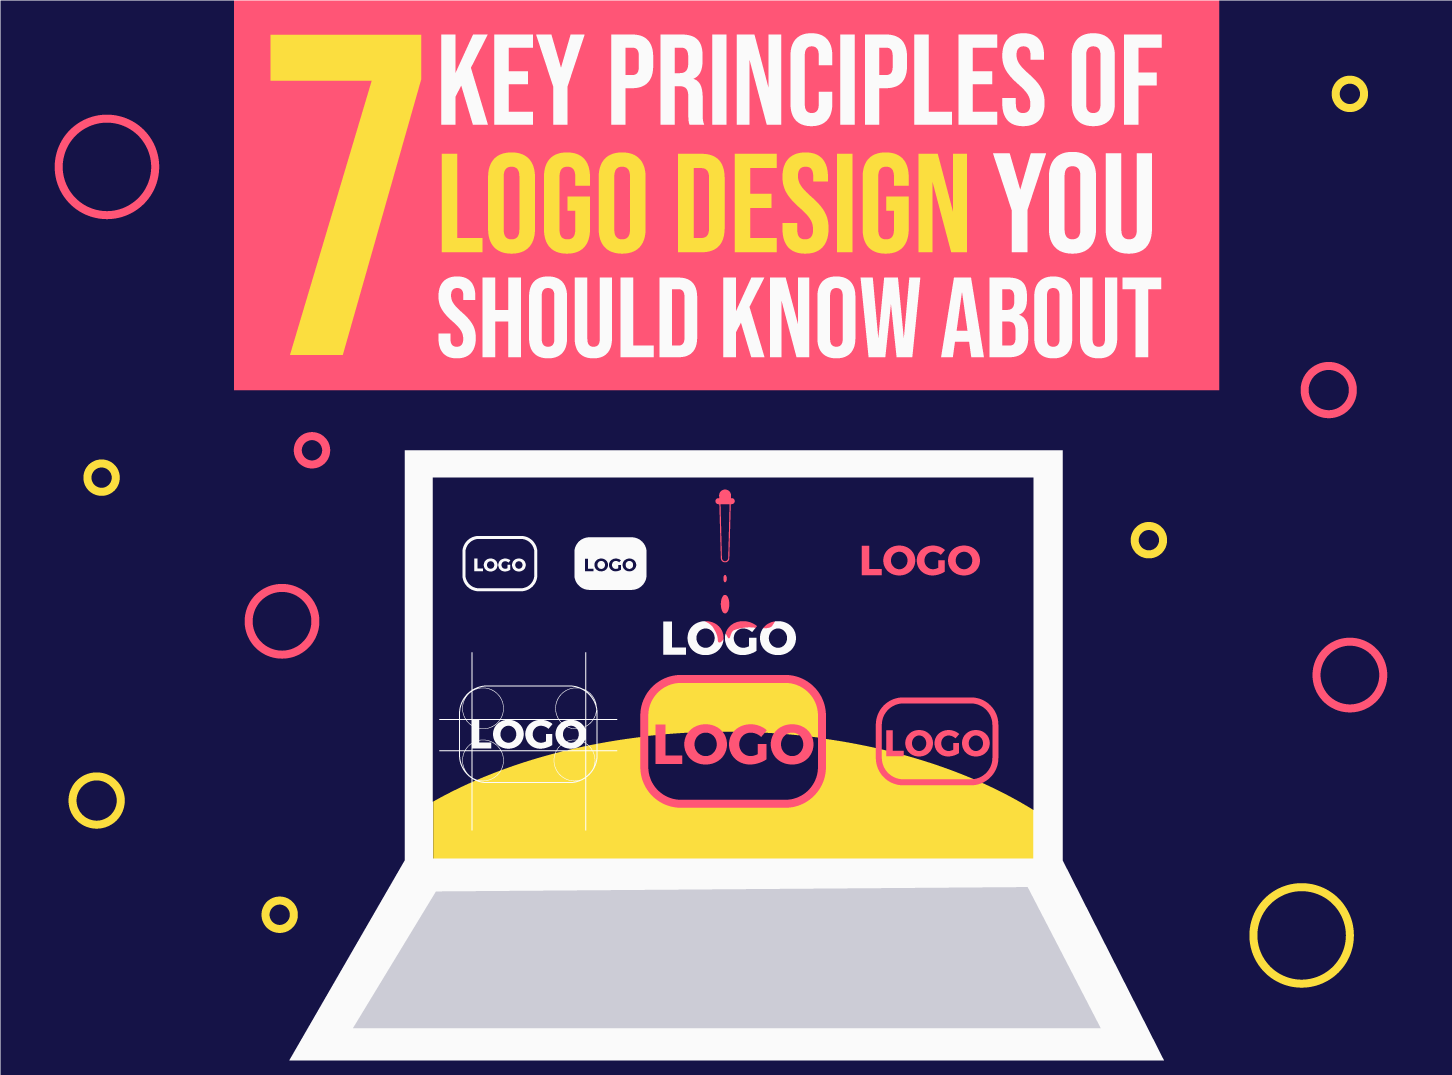 7 Key Principles of Logo Design Your Should Know About - Inkyy Web Design Studio & Branding